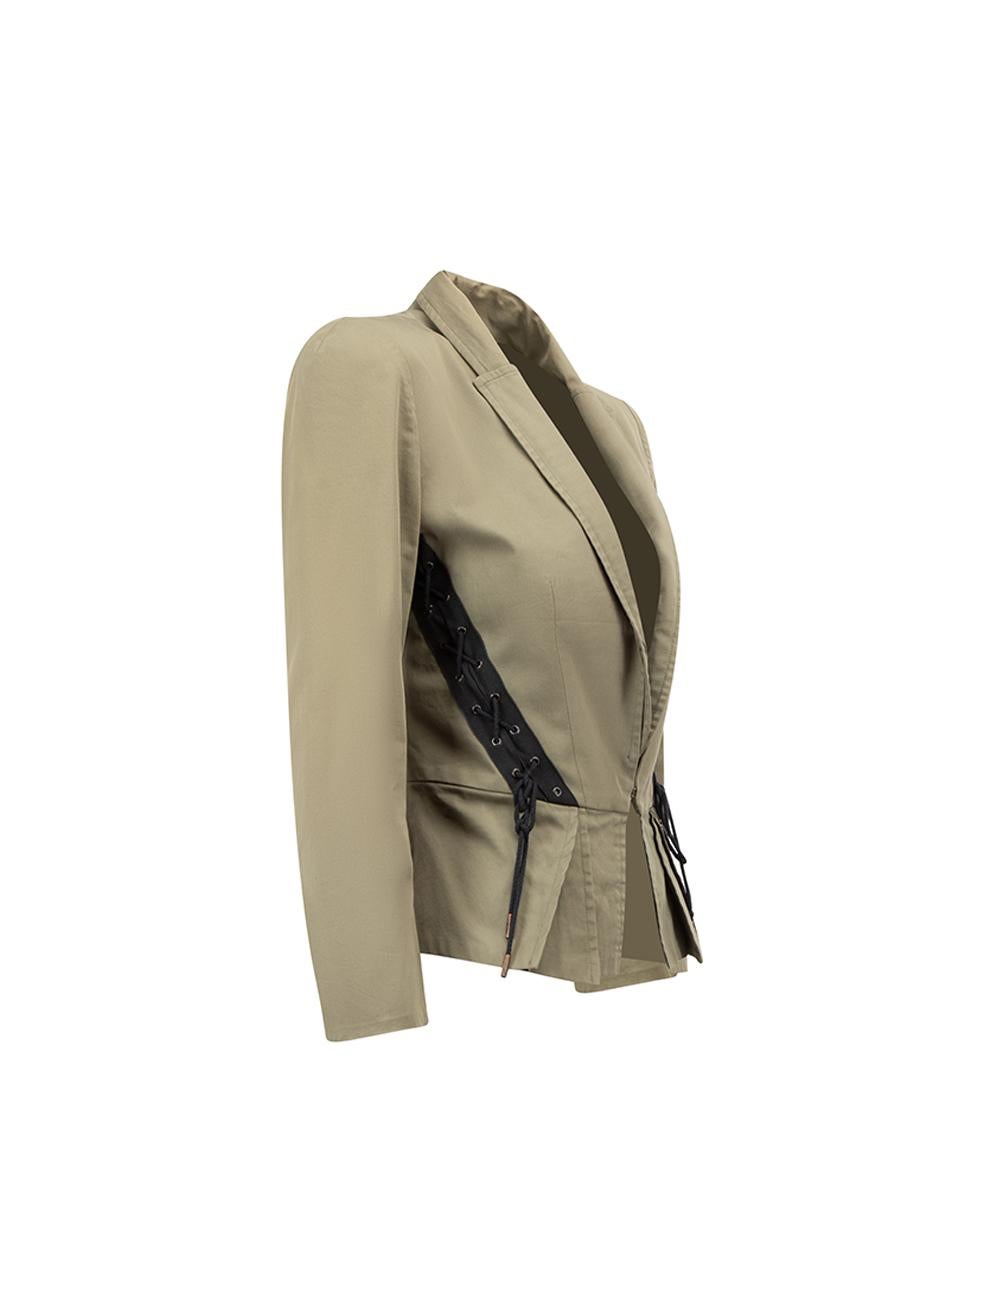 CONDITION is Very good. Minimal visible wear to jacket is evident. Minimal wear and pilling to underarms on this used McQ designer resale item. 
 
 Details
  Khaki
 Cotton
 Fitted jacket
 Front hook and eye closure
 Lac up detail on front
 Slits on